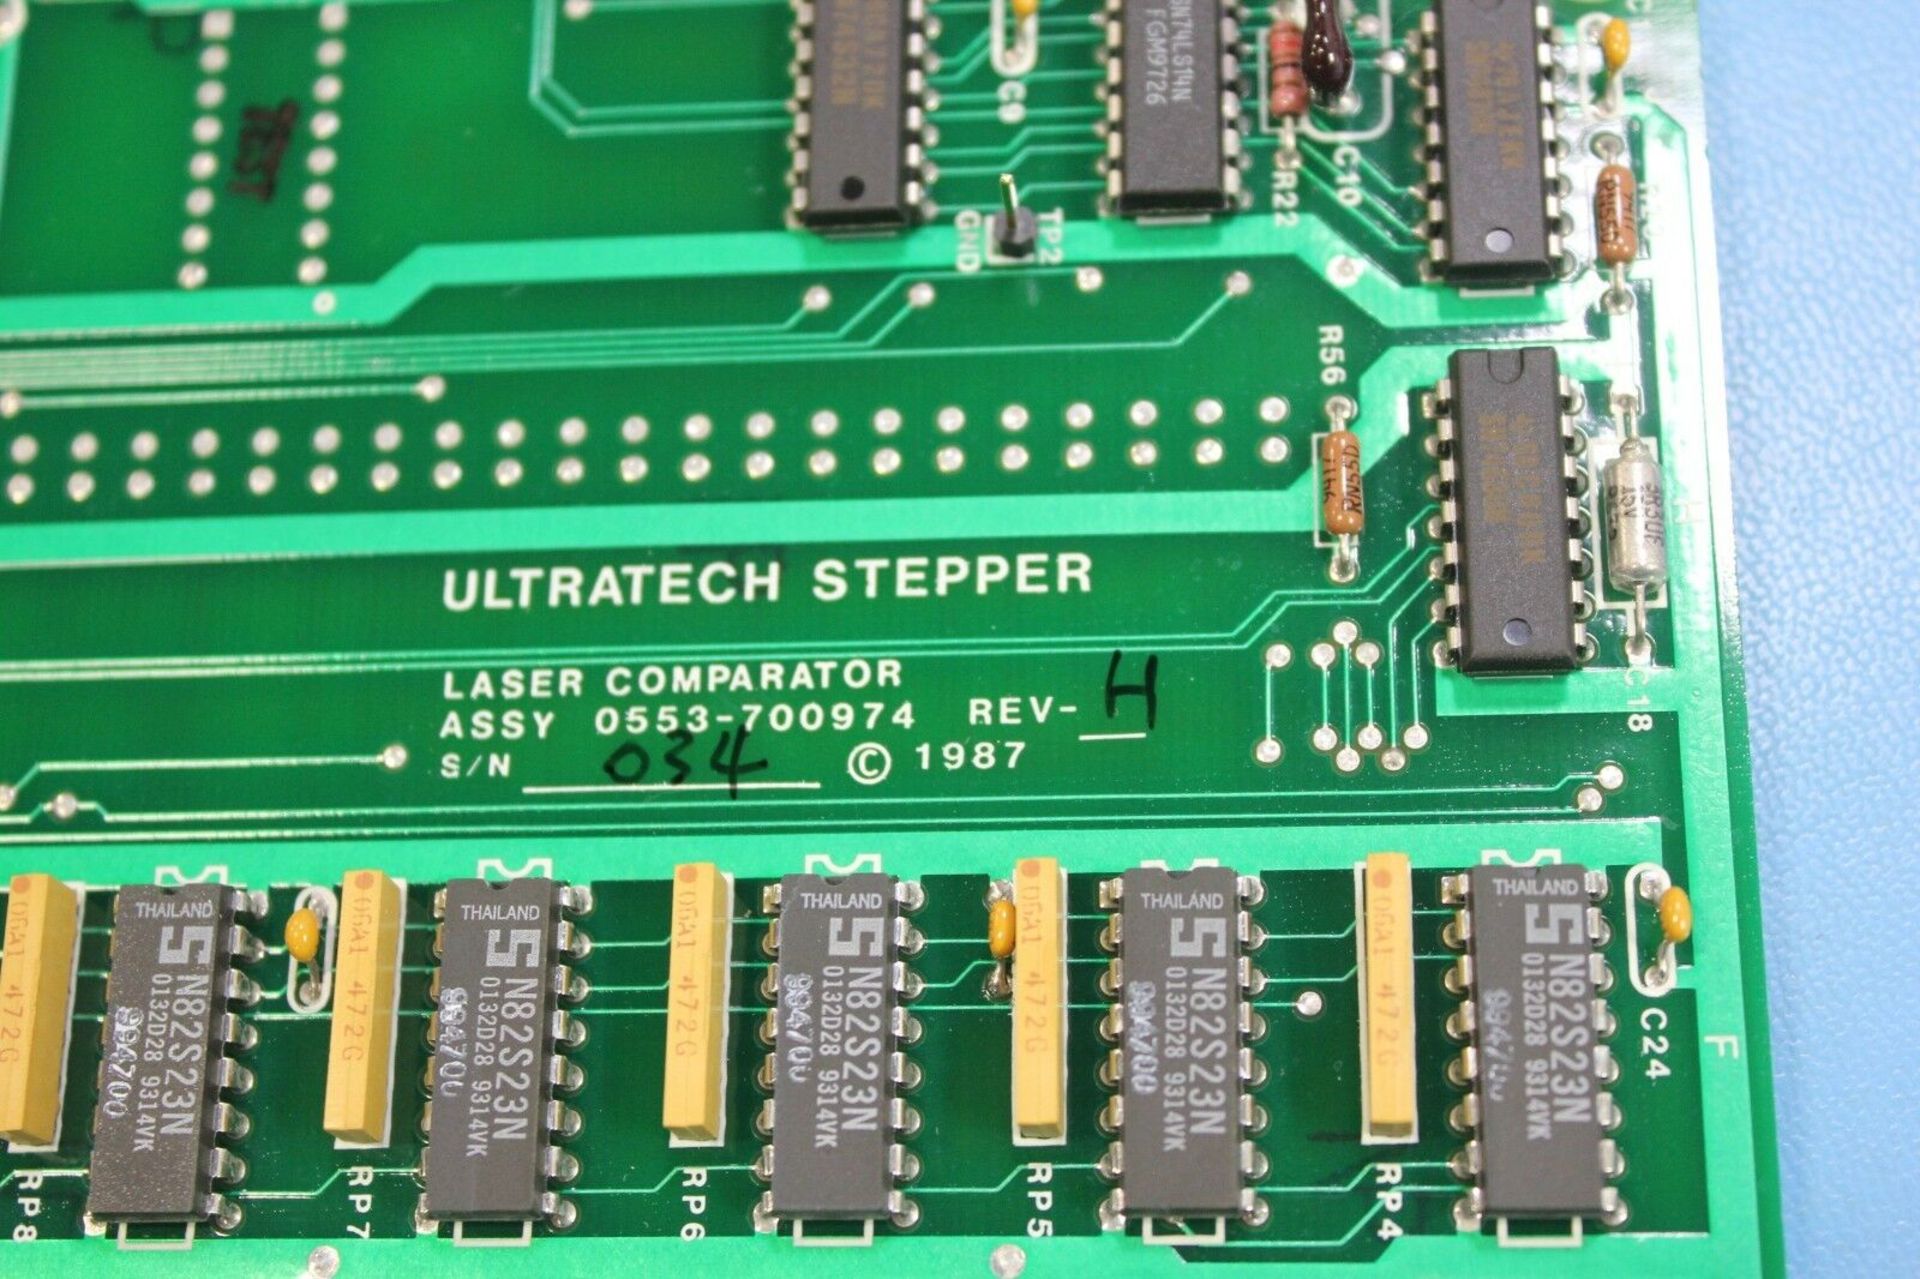 ULTRATECH STEPPER LASER COMPARATOR CONTROL BOARD - Image 5 of 5